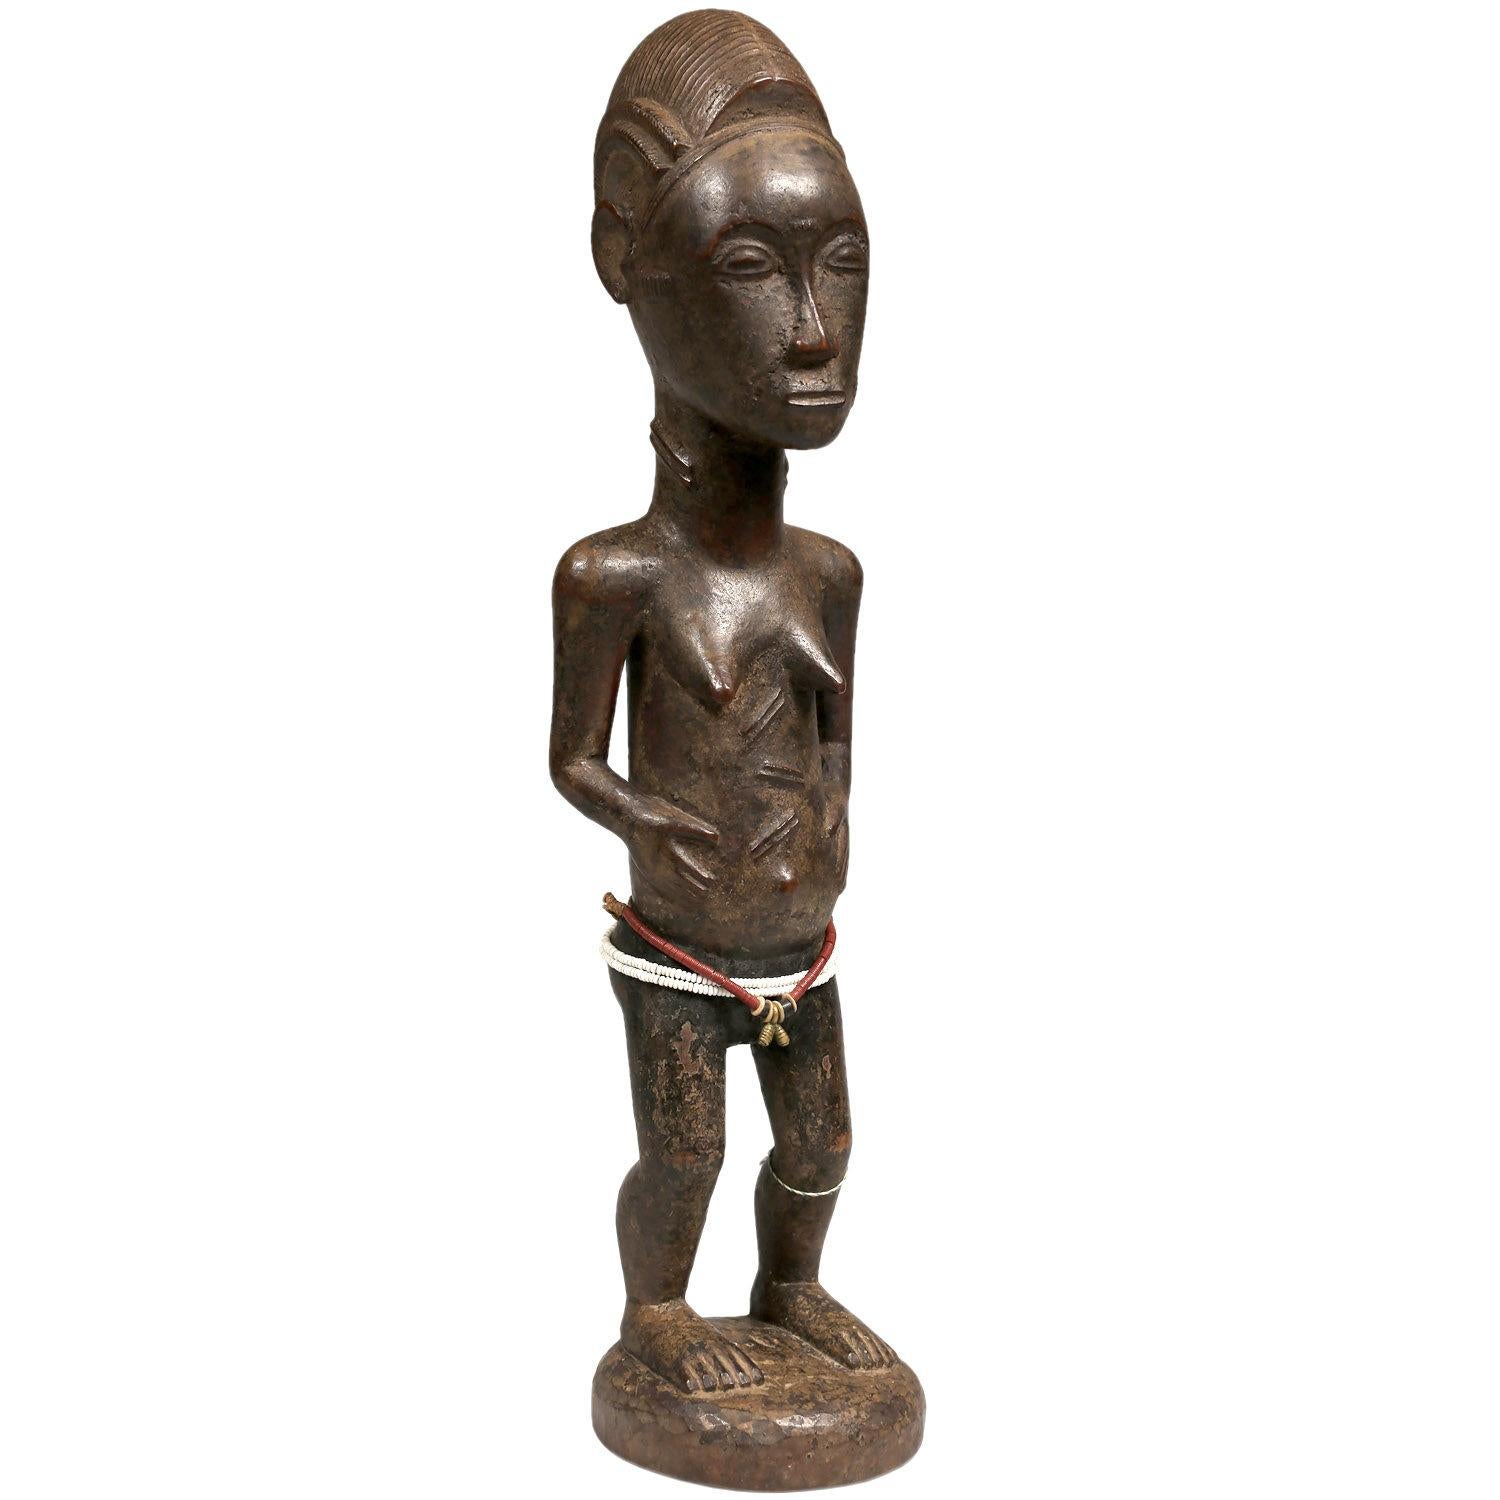 1st Half 20th Century Female Baule Figure, Ivory Coast, Africa

A stylistically pleasing figure. The soft brown patina and fine carving impart a delicacy that I don’t usually associate with figures of spiritual spouses (blolo bian). With Classic